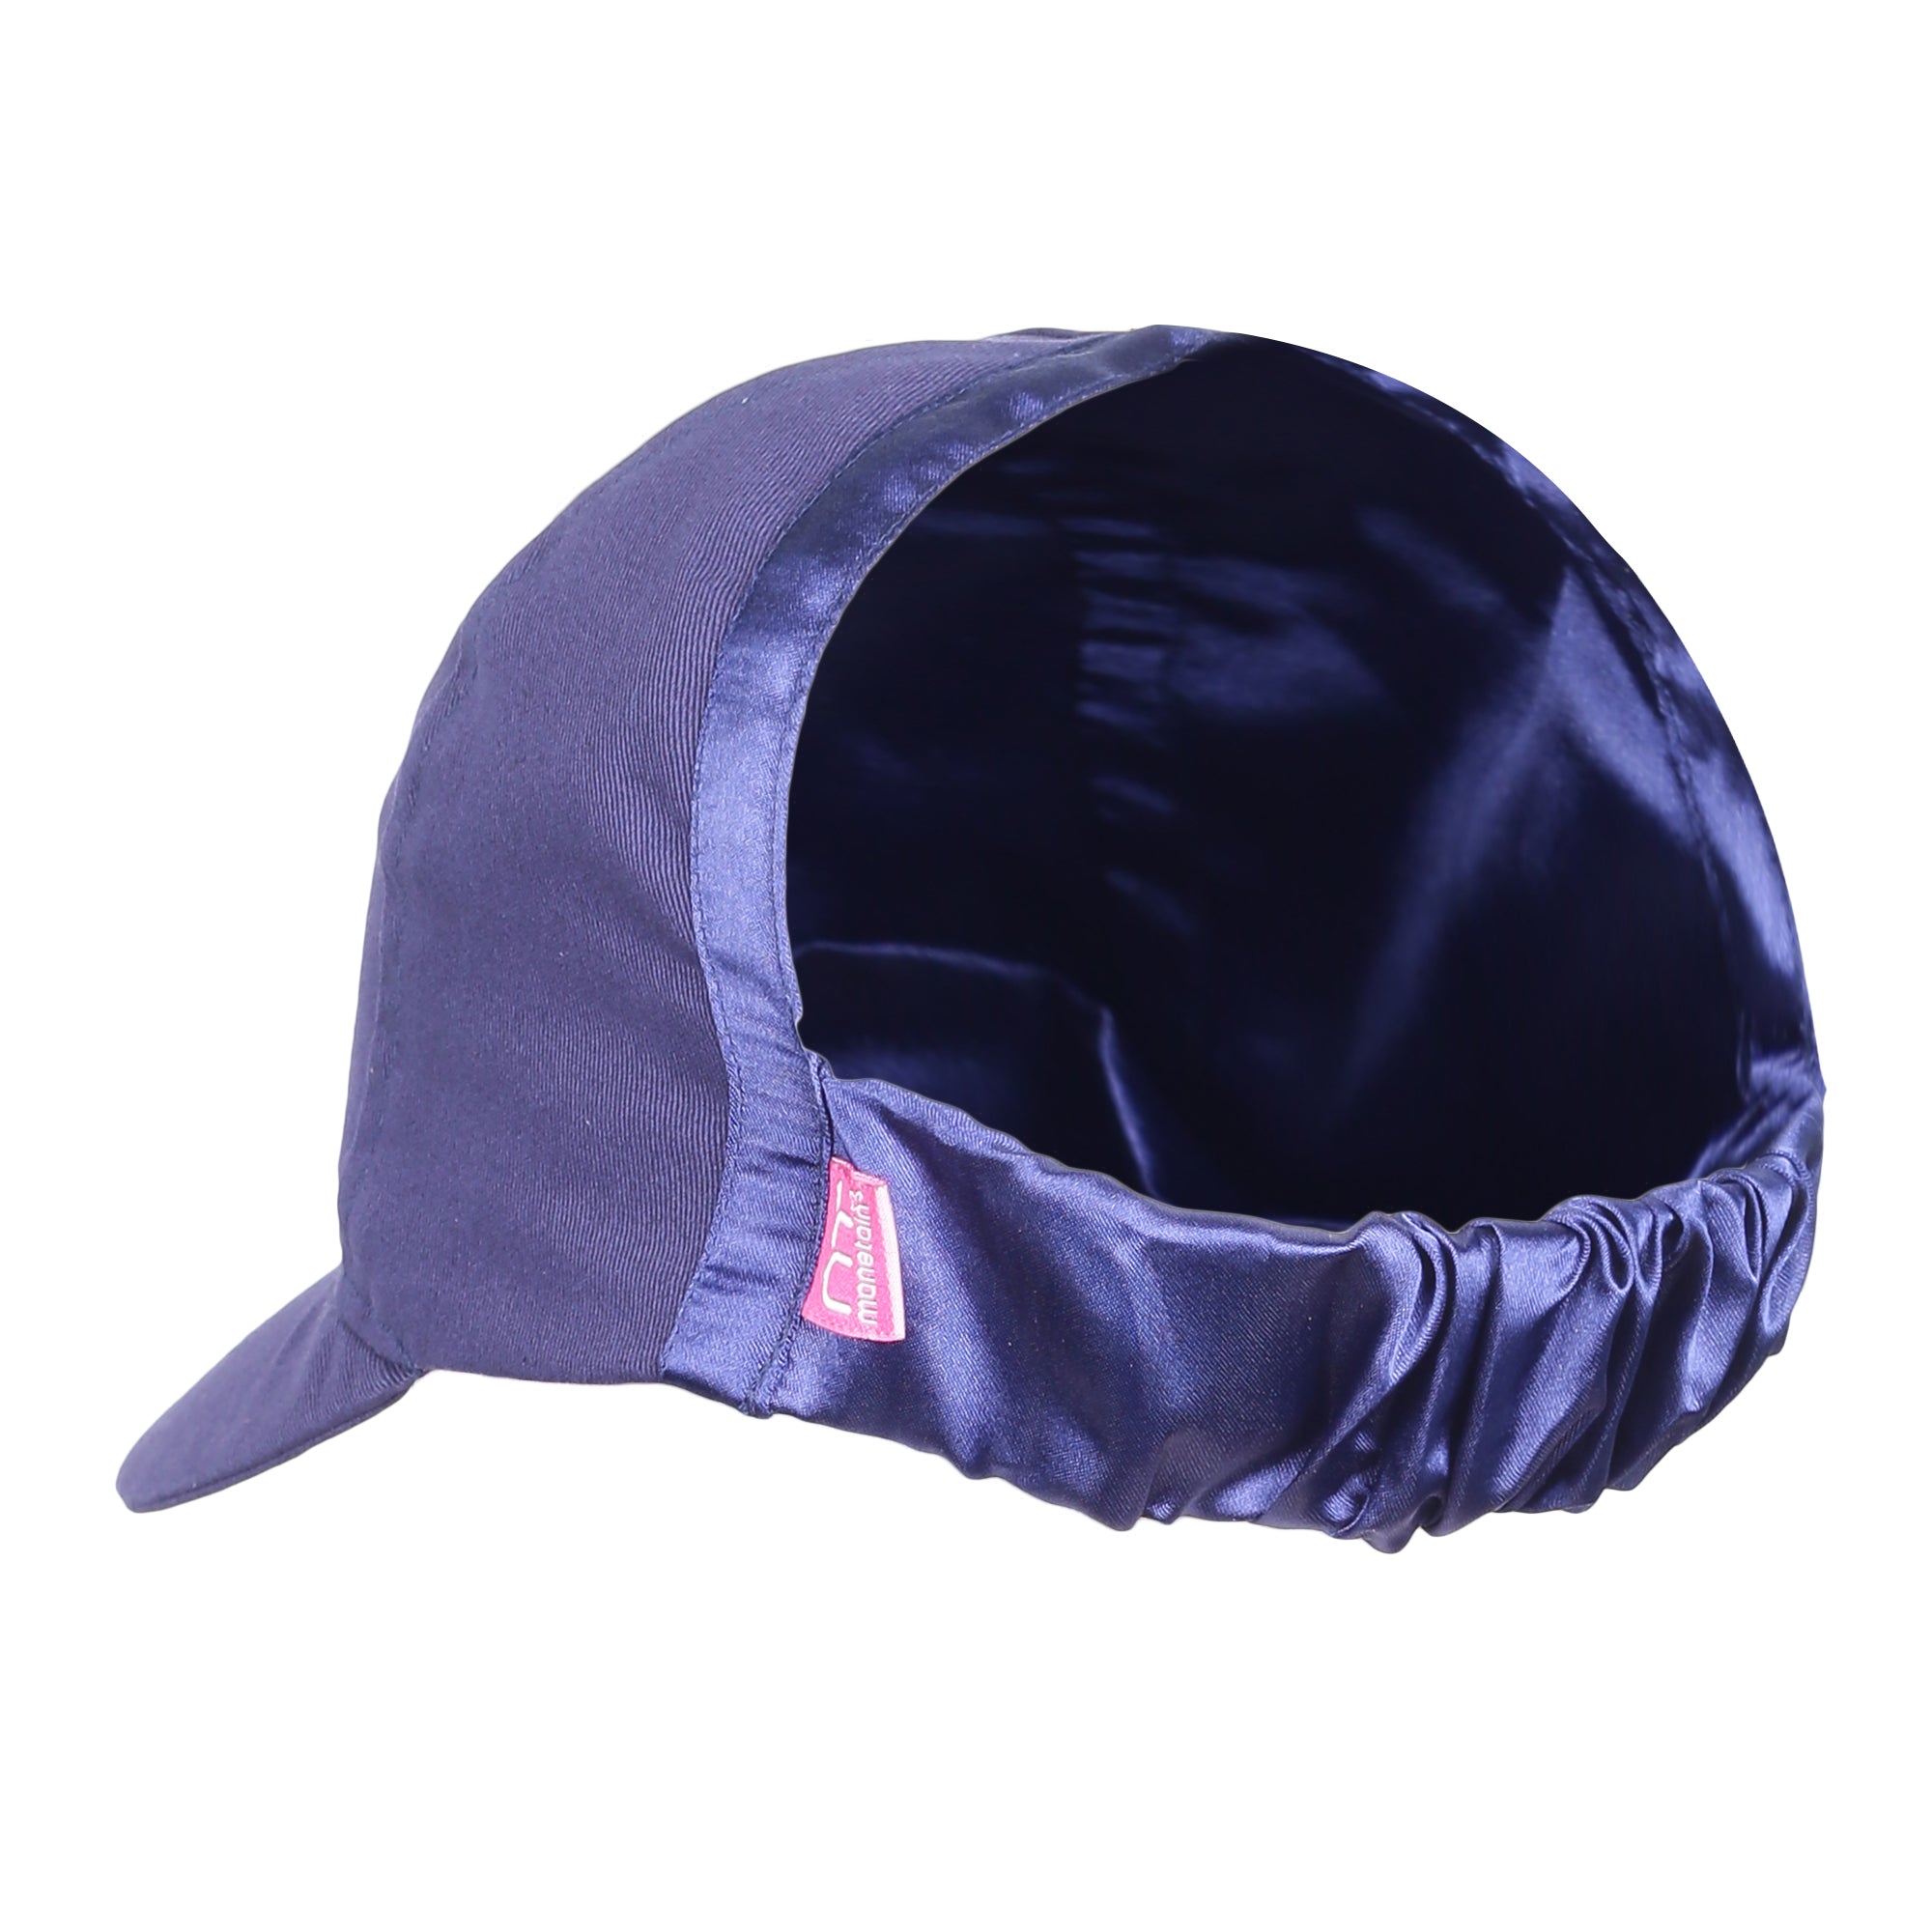 Satin lined cap - Manetain Store